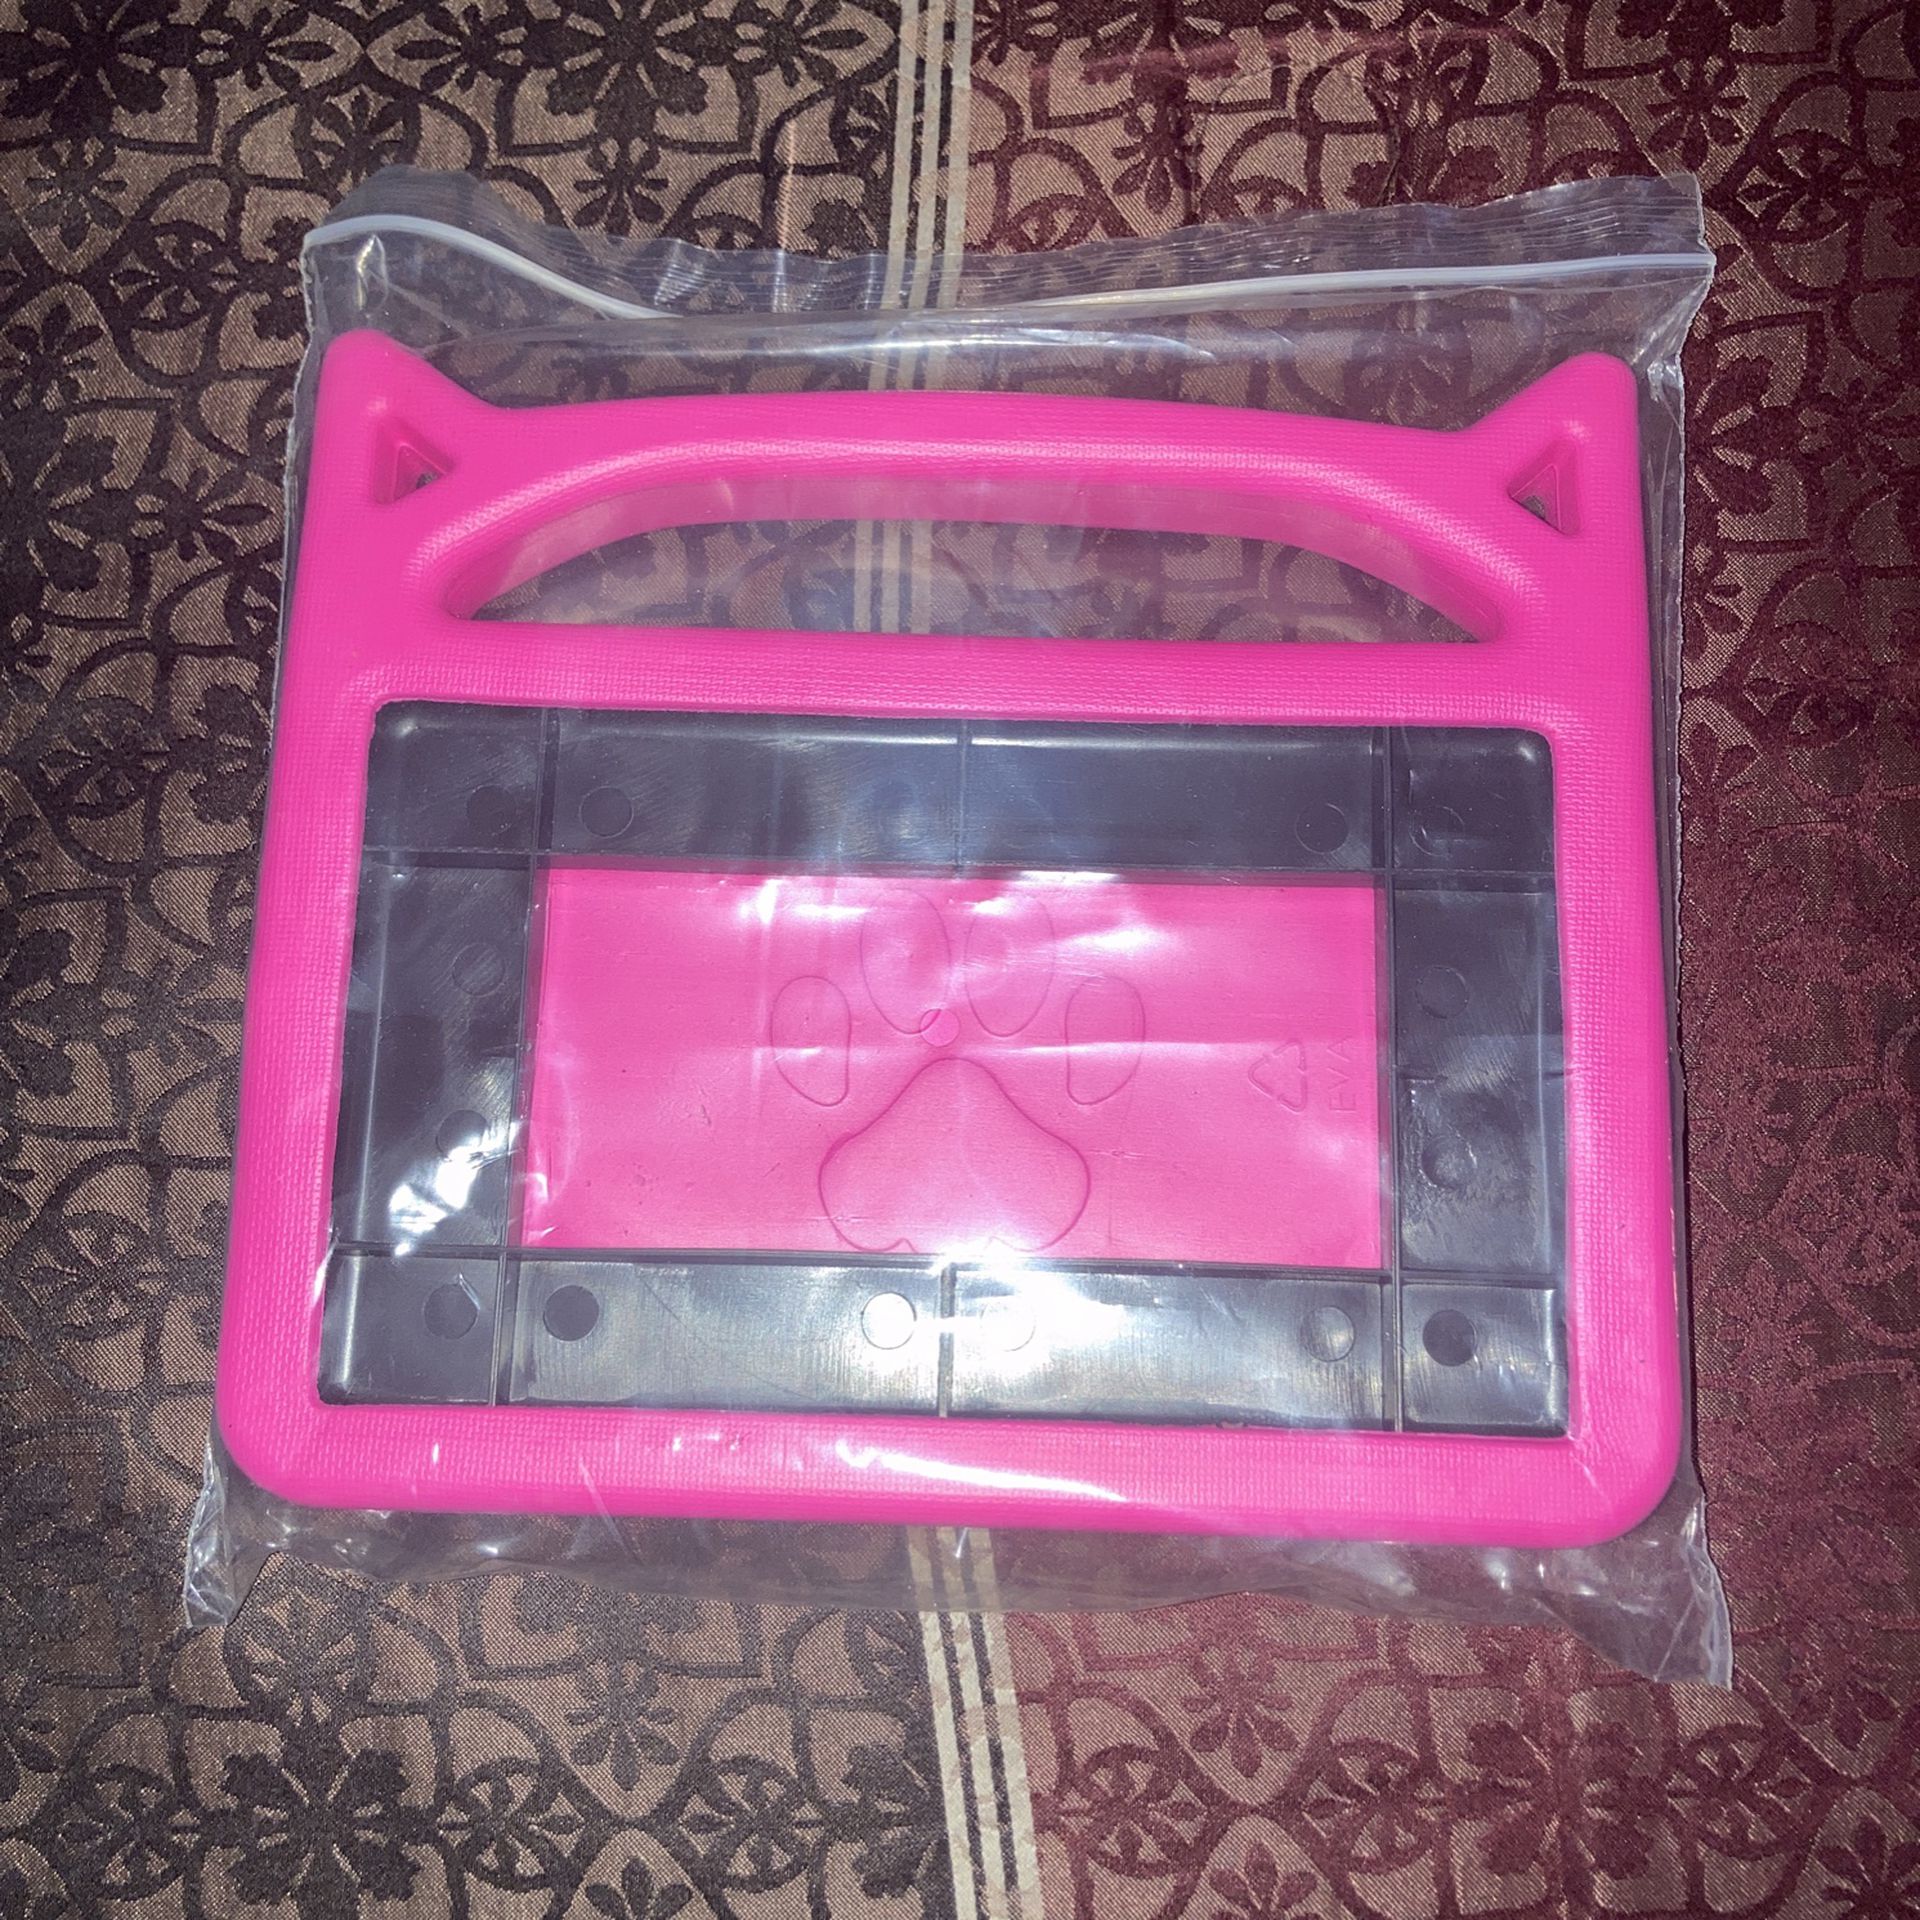 New Fire 7 Tablet Case, Pink (rubber)